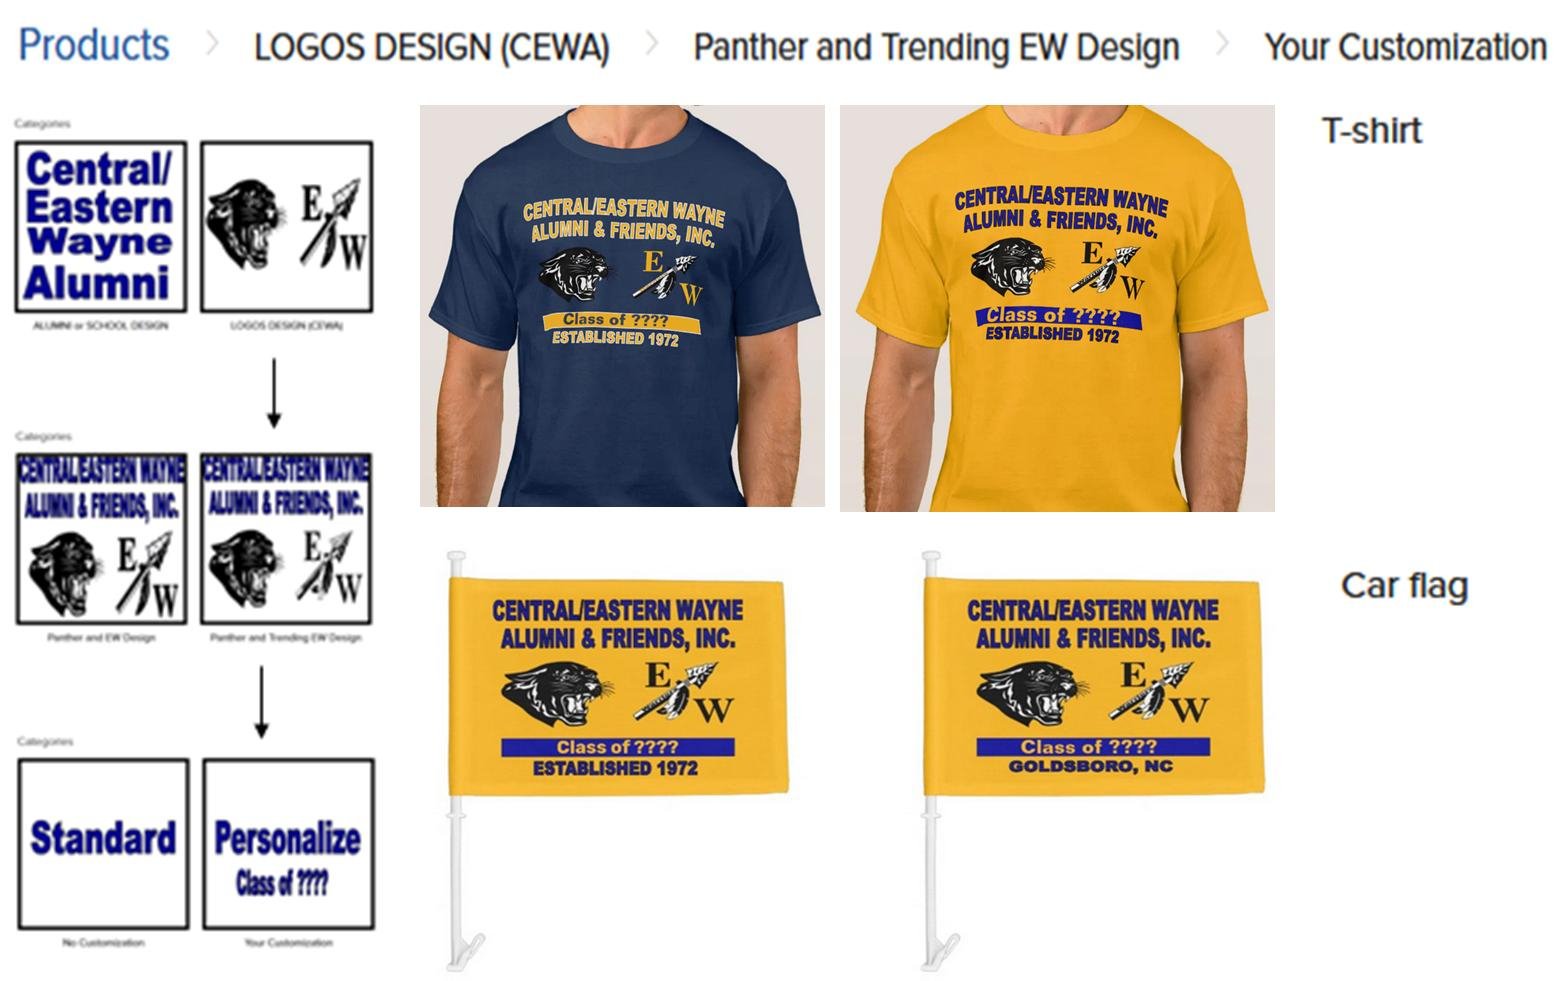 Products -> LOGOS DESIGN (CEWA) -> Panther and Trending EW Design -> Your Customization